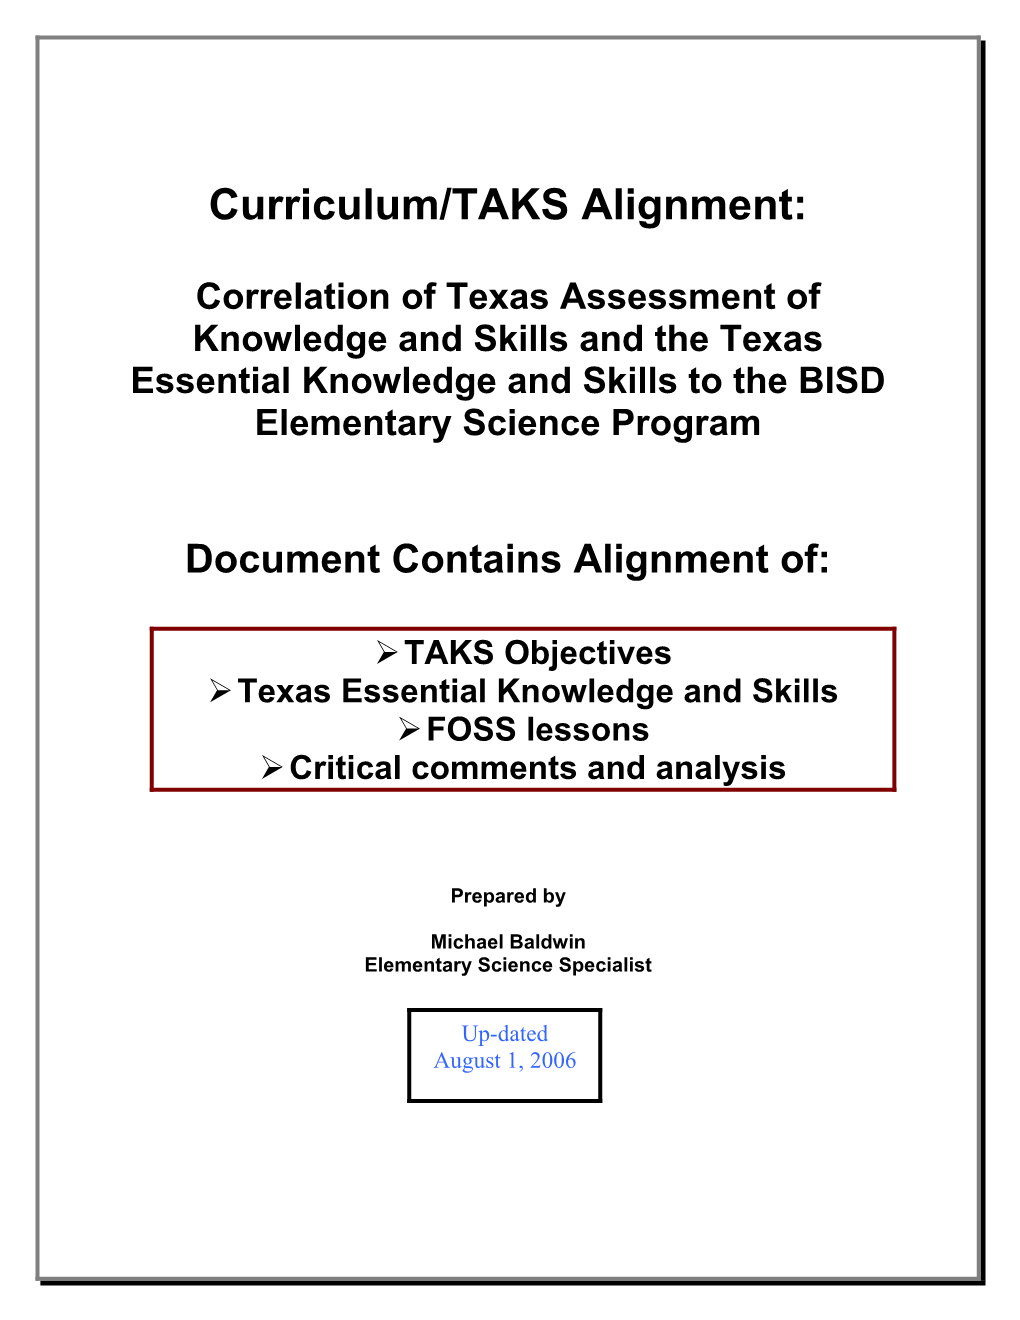 Texas Assessment of Knowledge and Skills Objective 1